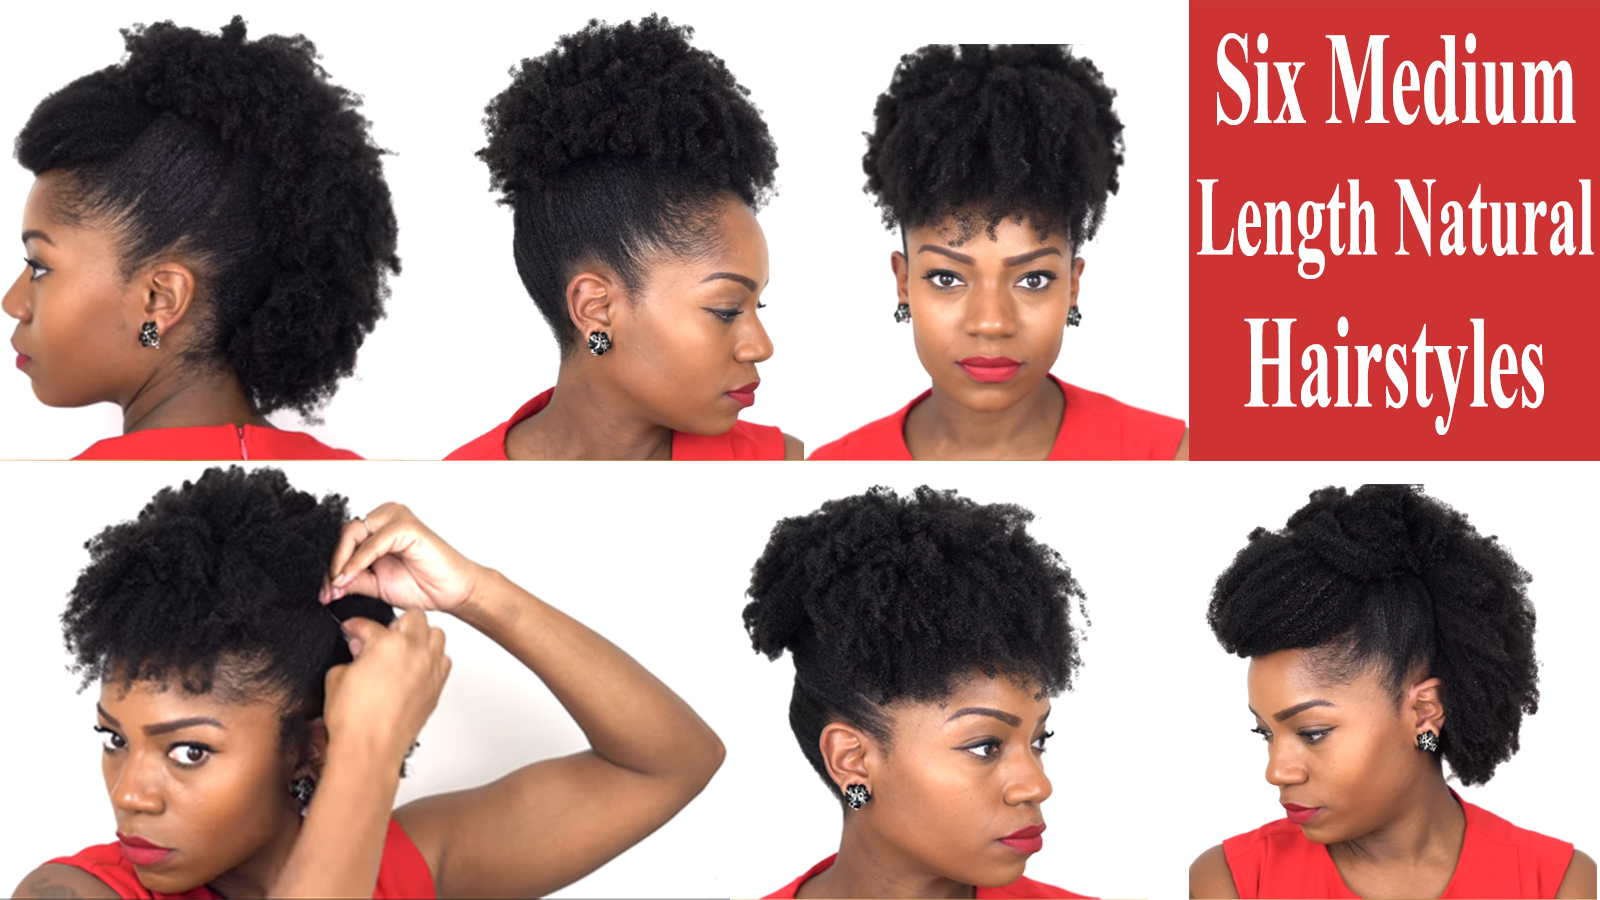 Six Fabulous Hairstyles For Medium Length Natural Hair - Great For All  Occasion ⋆ African American Hairstyle Videos - AAHV